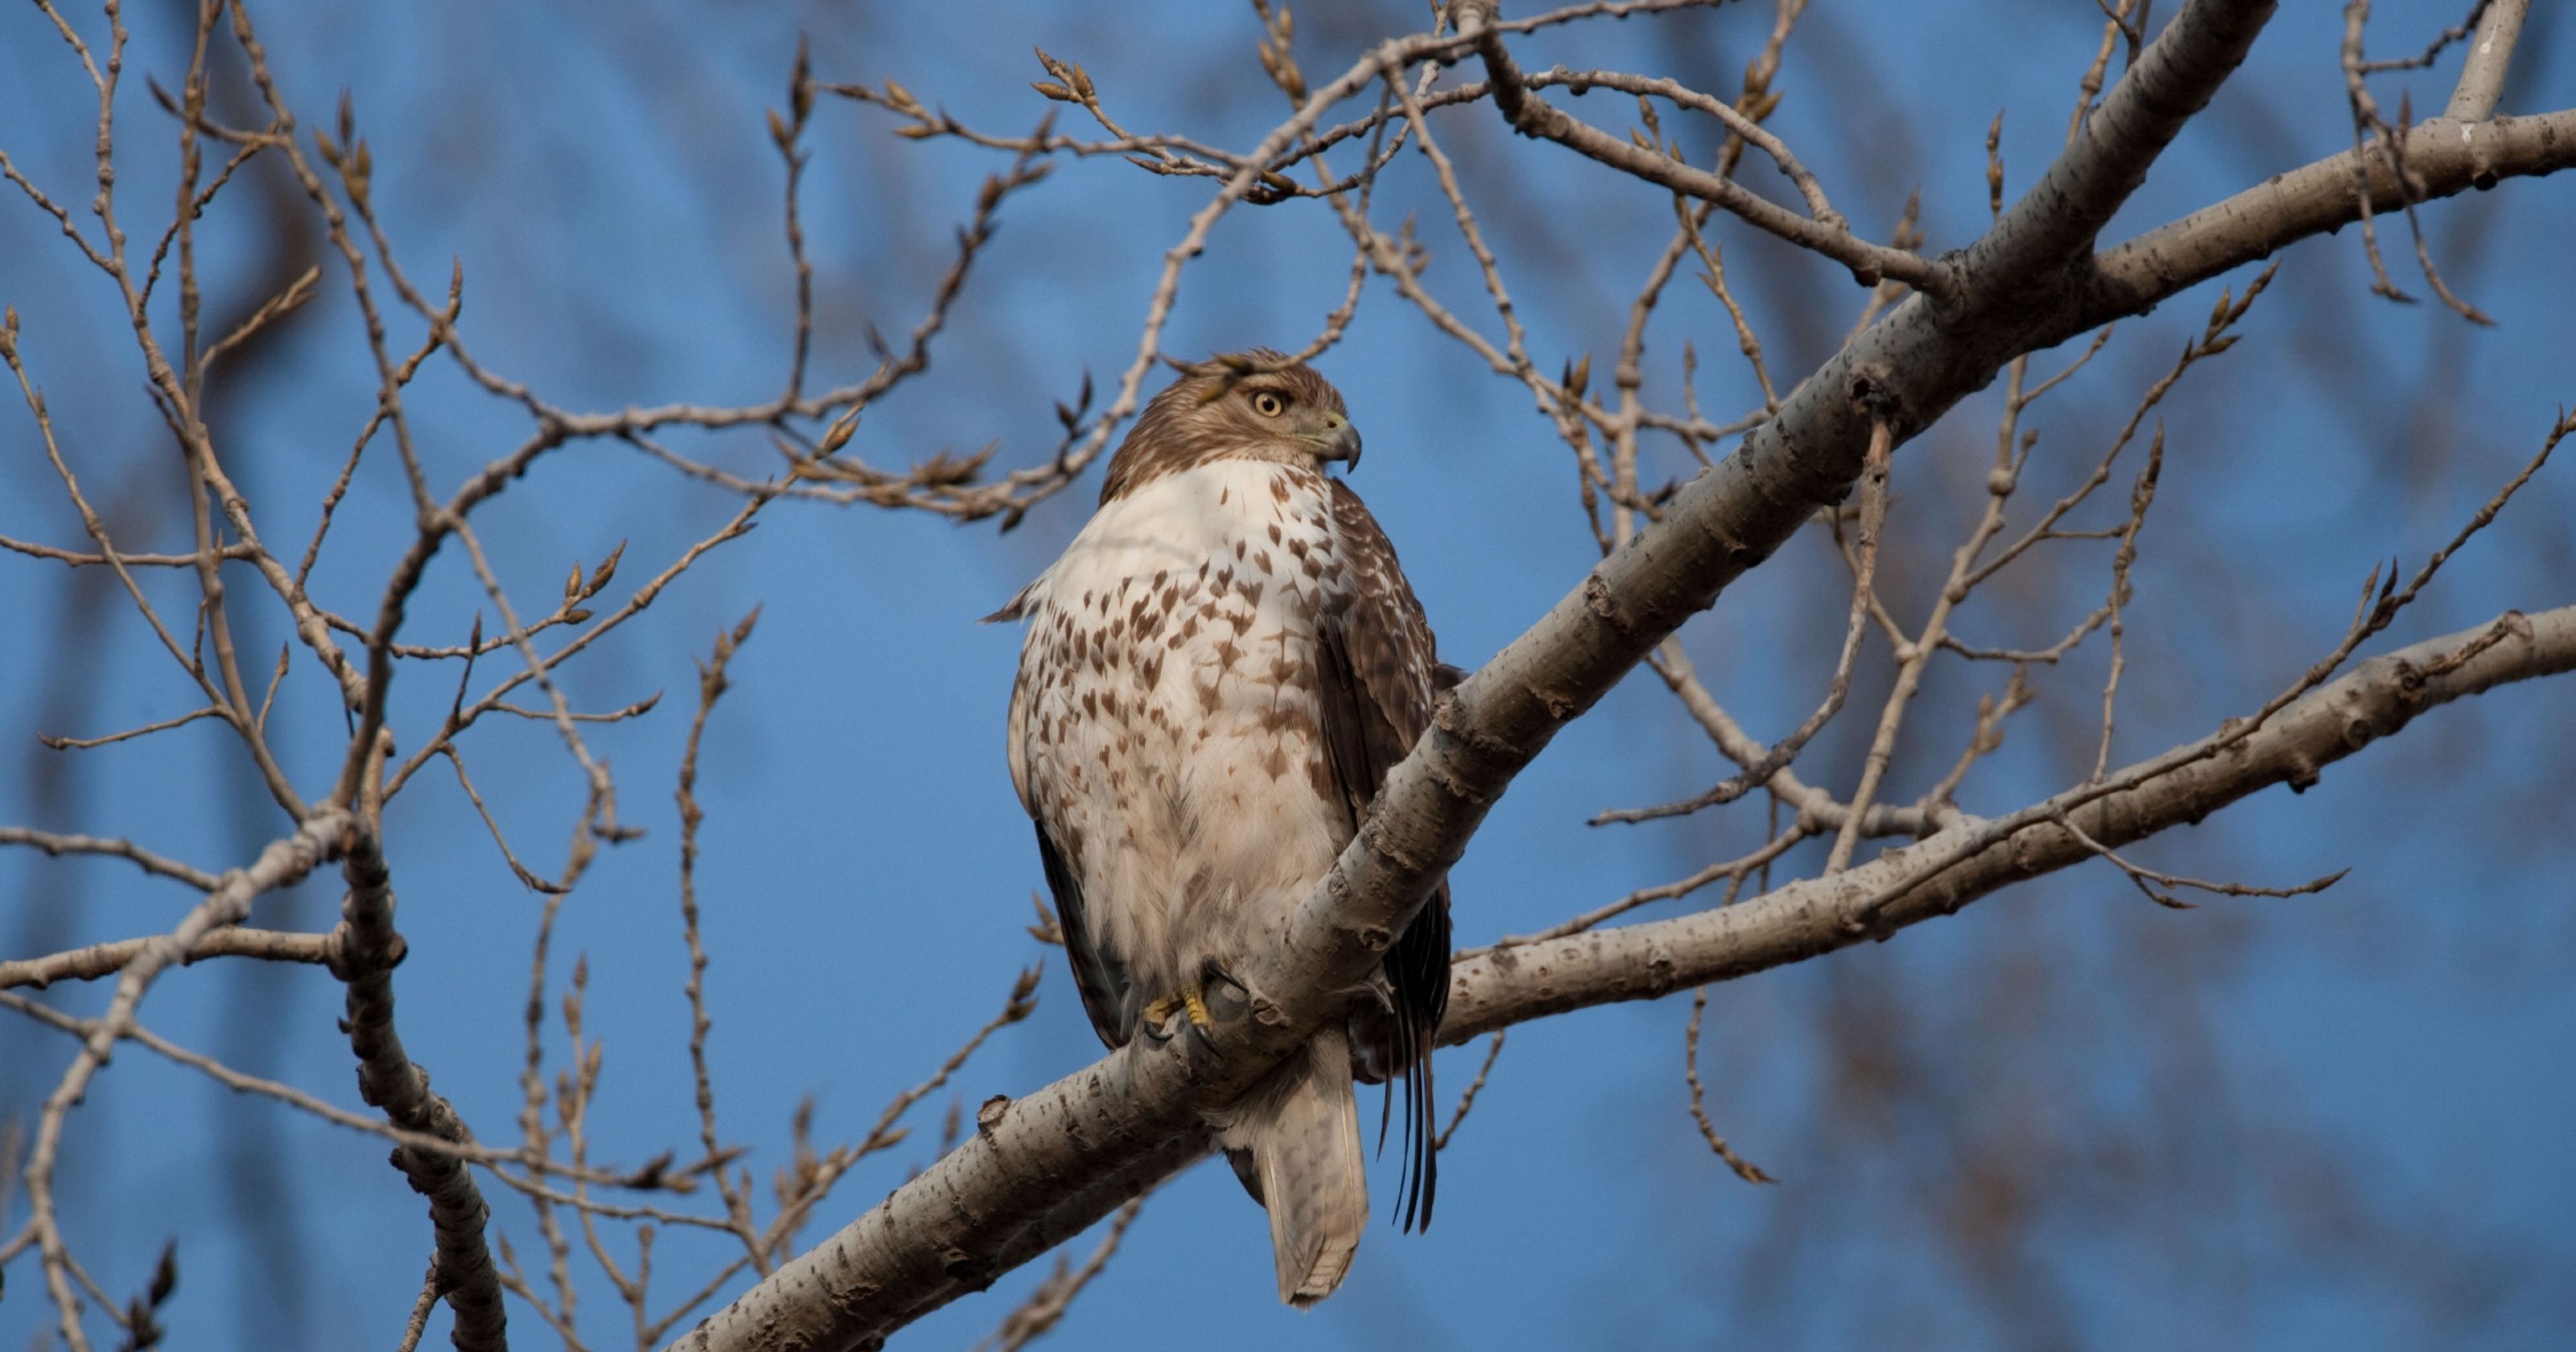 Critter of the Week: Red-tailed hawk